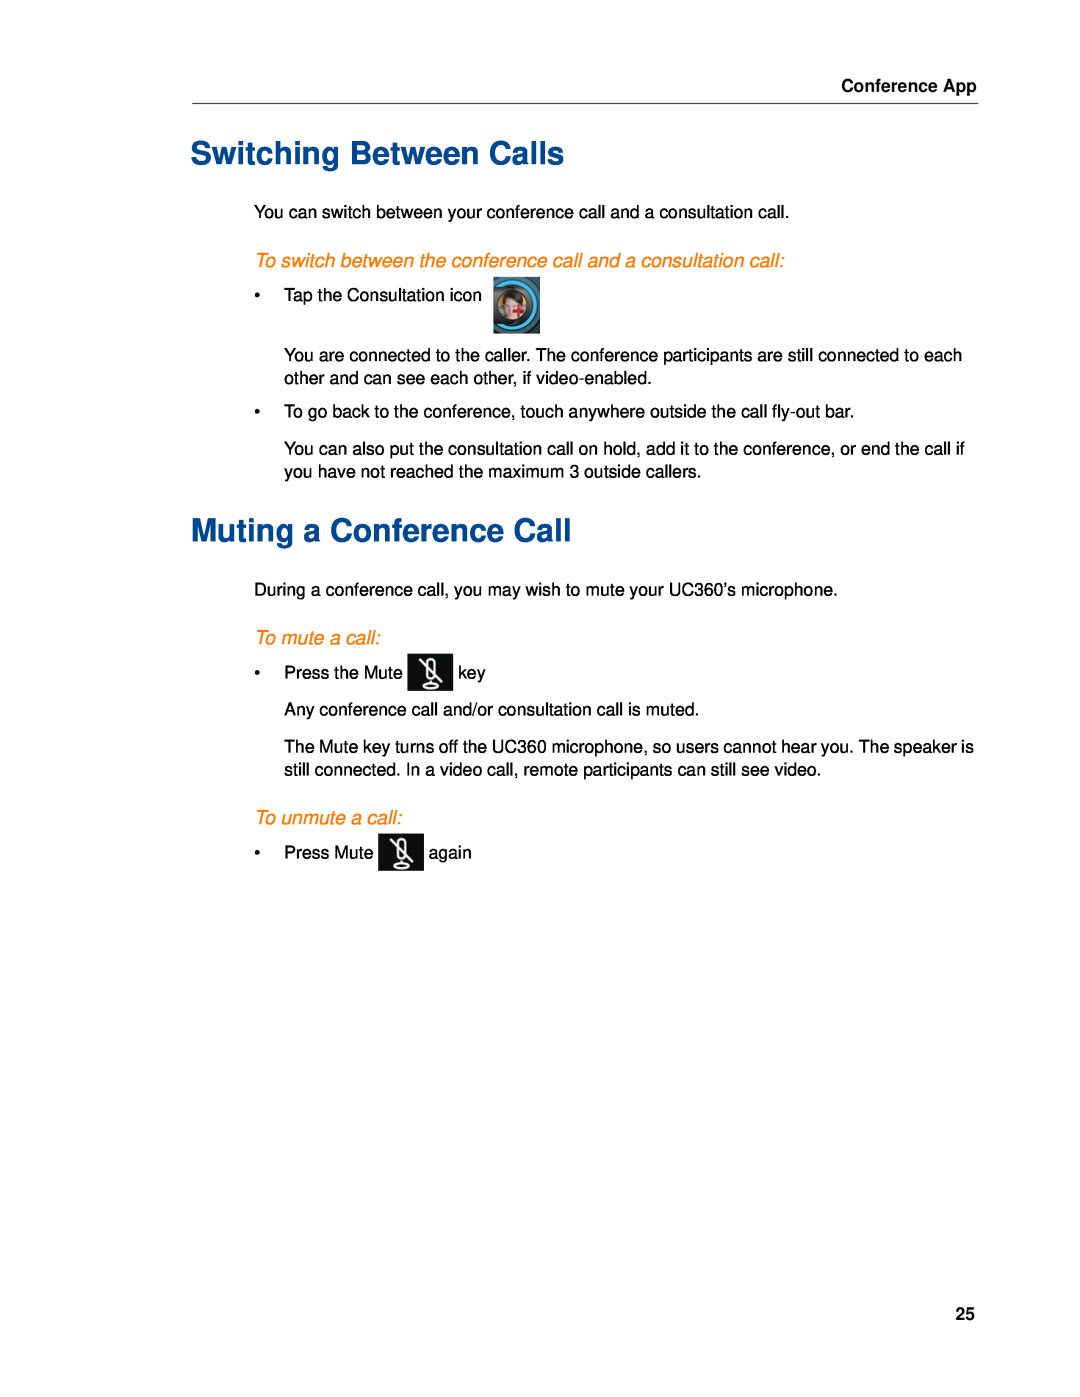 Mitel UC360 manual Switching Between Calls, Muting a Conference Call, To mute a call, To unmute a call, Conference App 